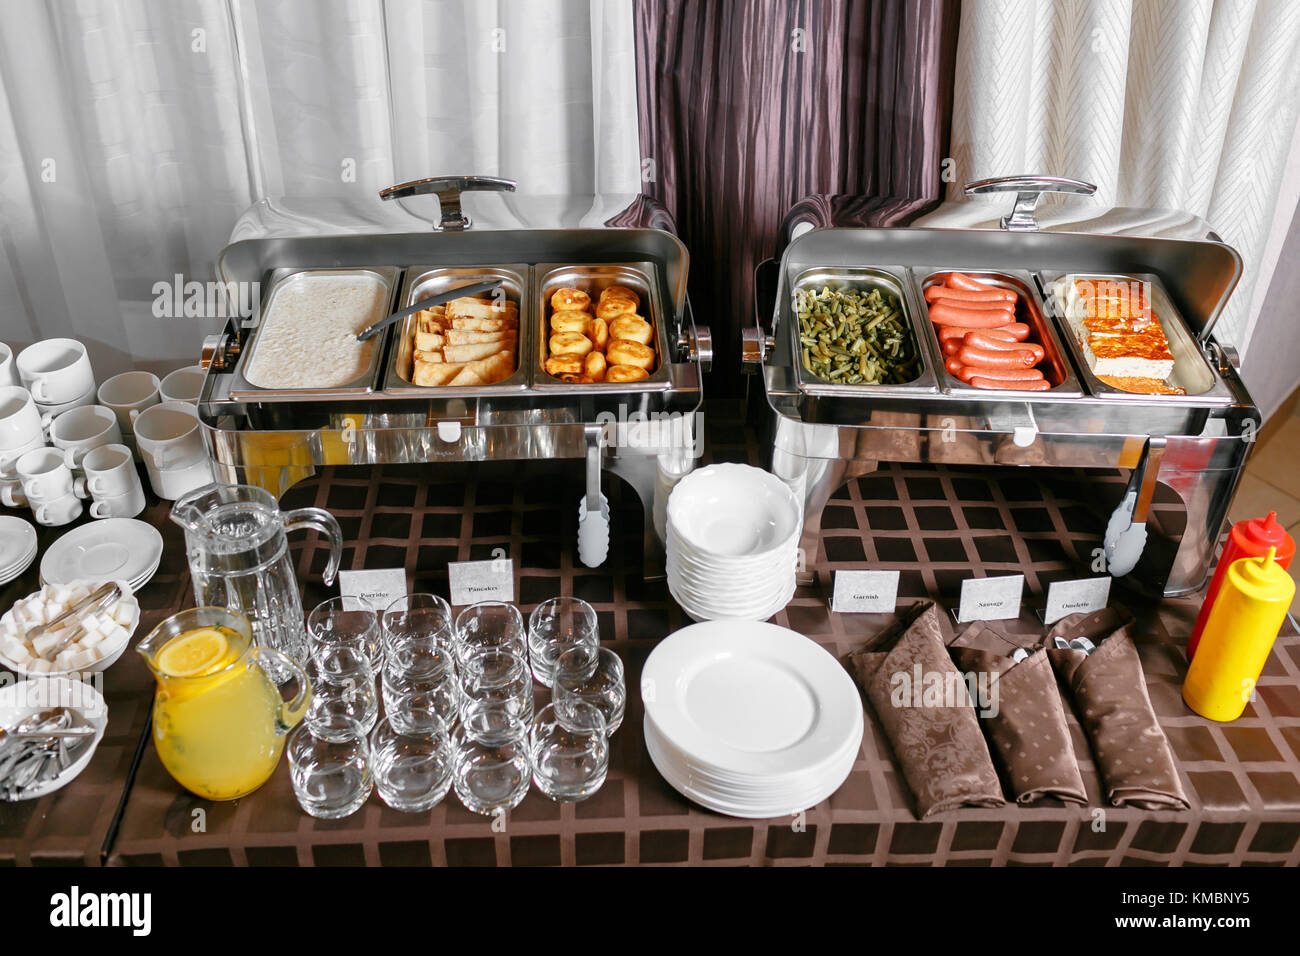 Toepassen Reductor Verdachte Many buffet heated trays ready for service. Breakfast in hotel catering  buffet, metal containers with warm meals Stock Photo - Alamy